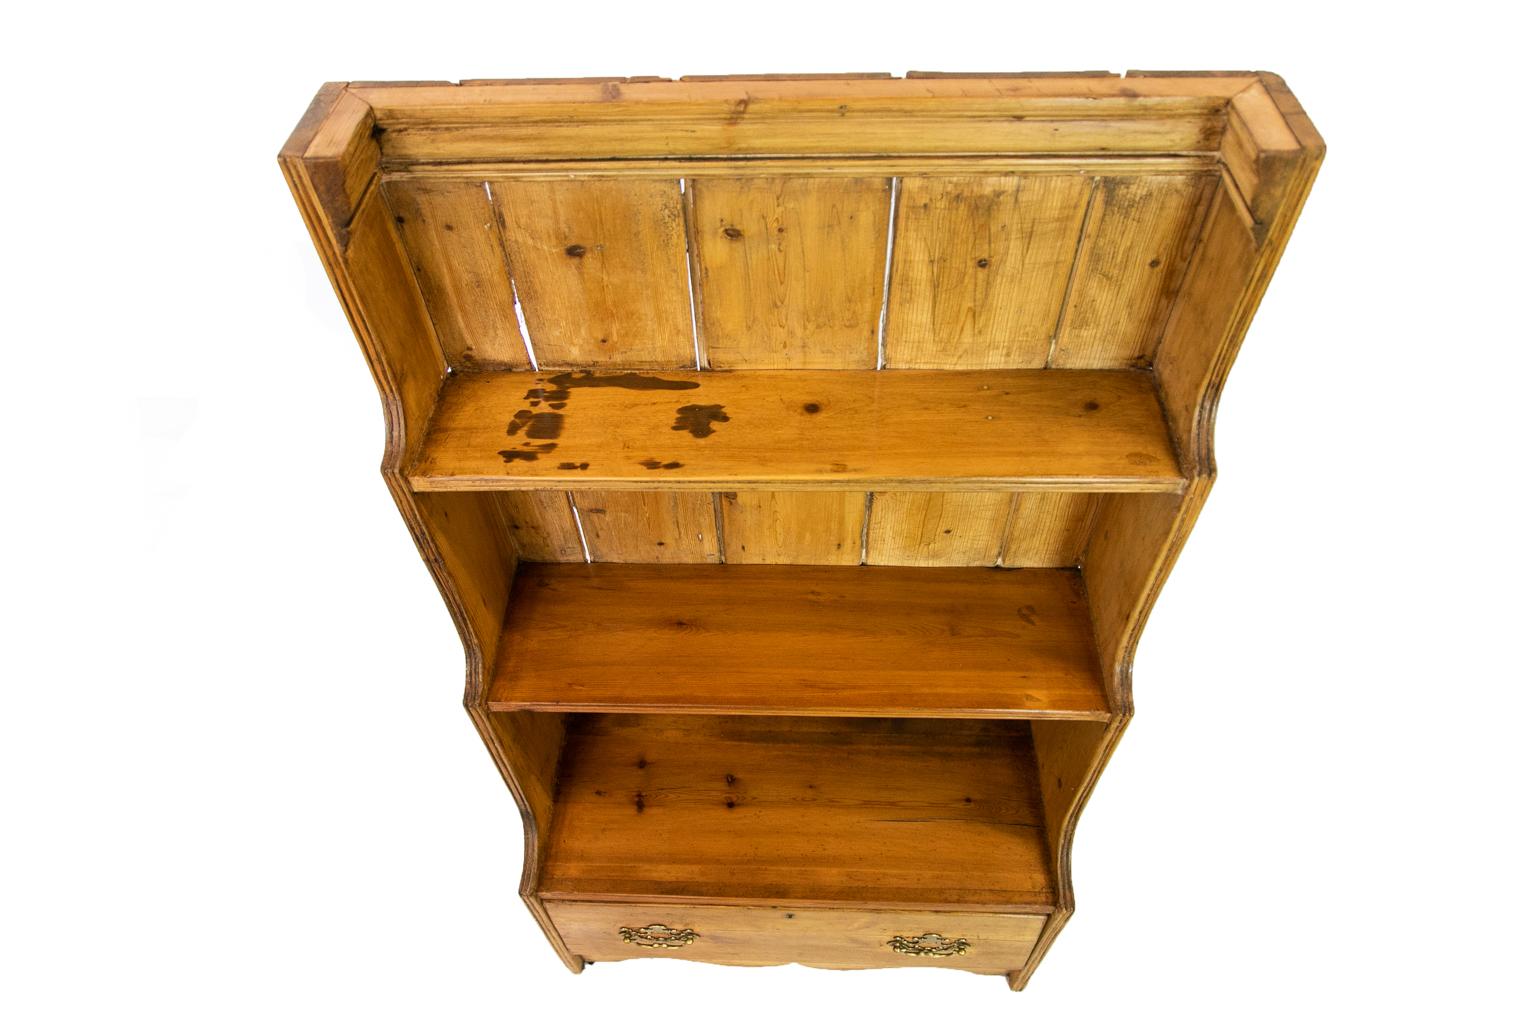 This pine book shelf has a heavy shaped molding supporting the top and has reeded front shaped sides framing three graduated shelves, which also have triple reeded front edges. There is a deep drawer below the bottom shelf and a shaped apron below